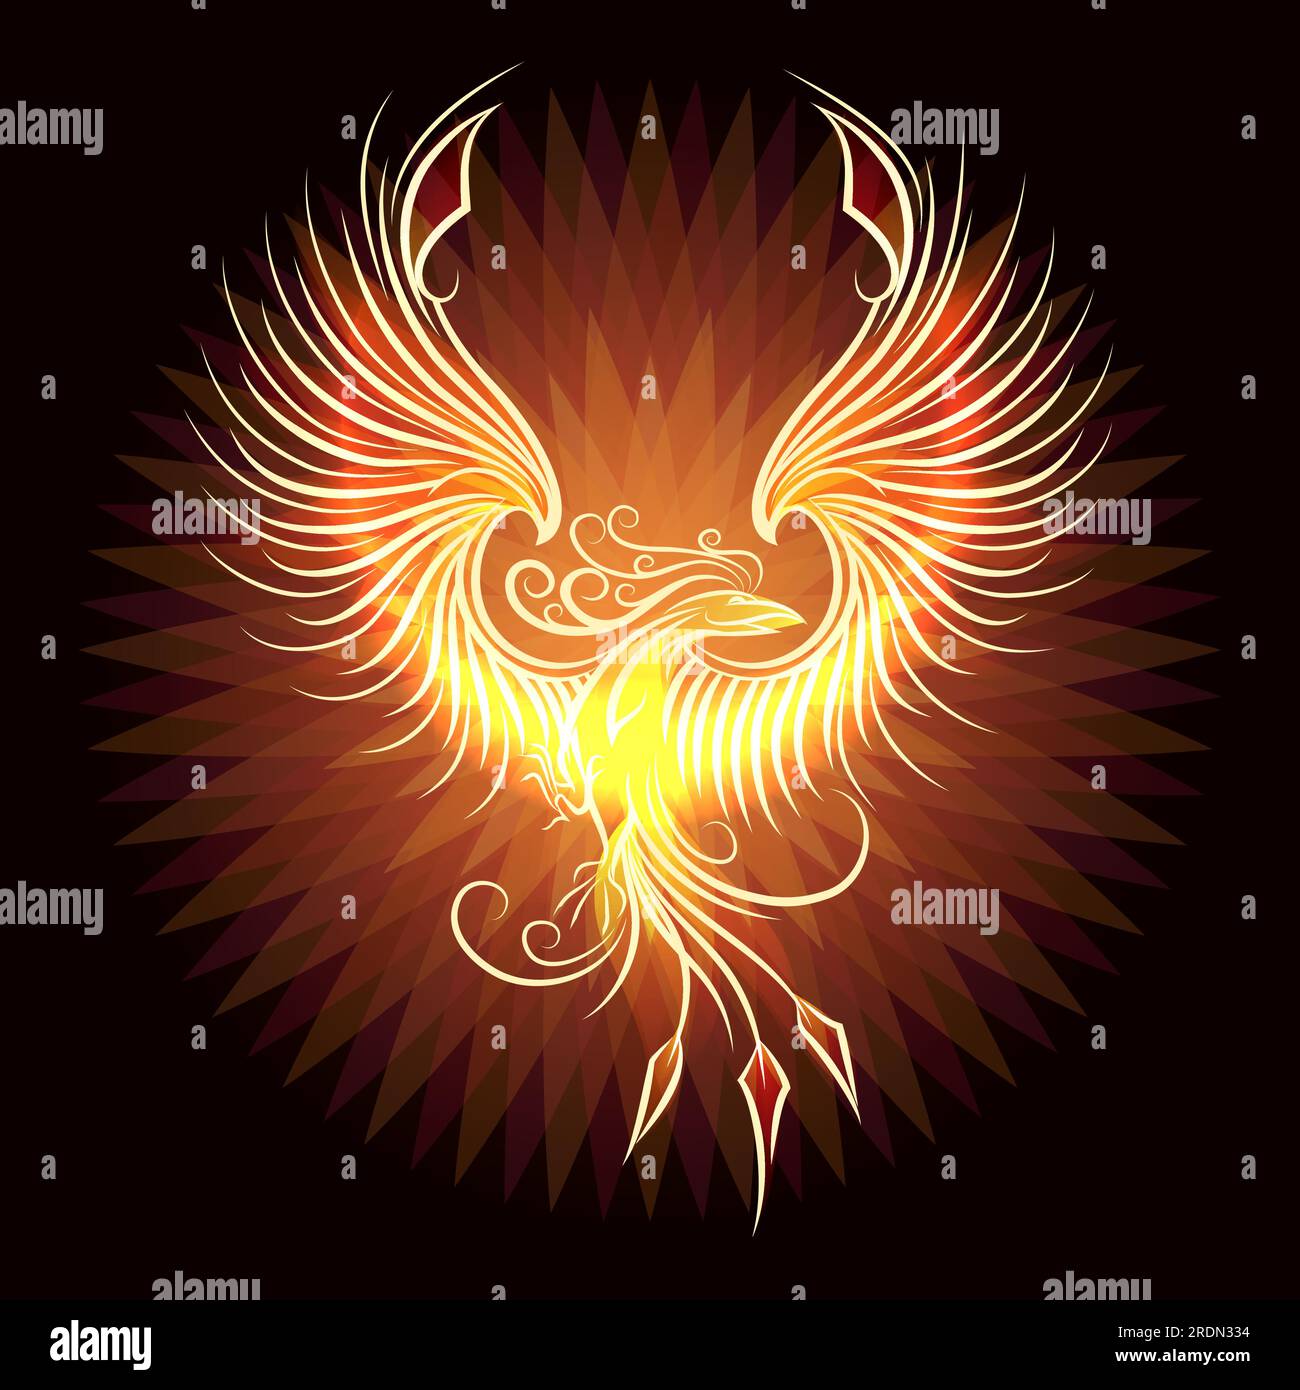 Fire Burning Phoenix Bird rising from ashes on Black Background. Vector ...